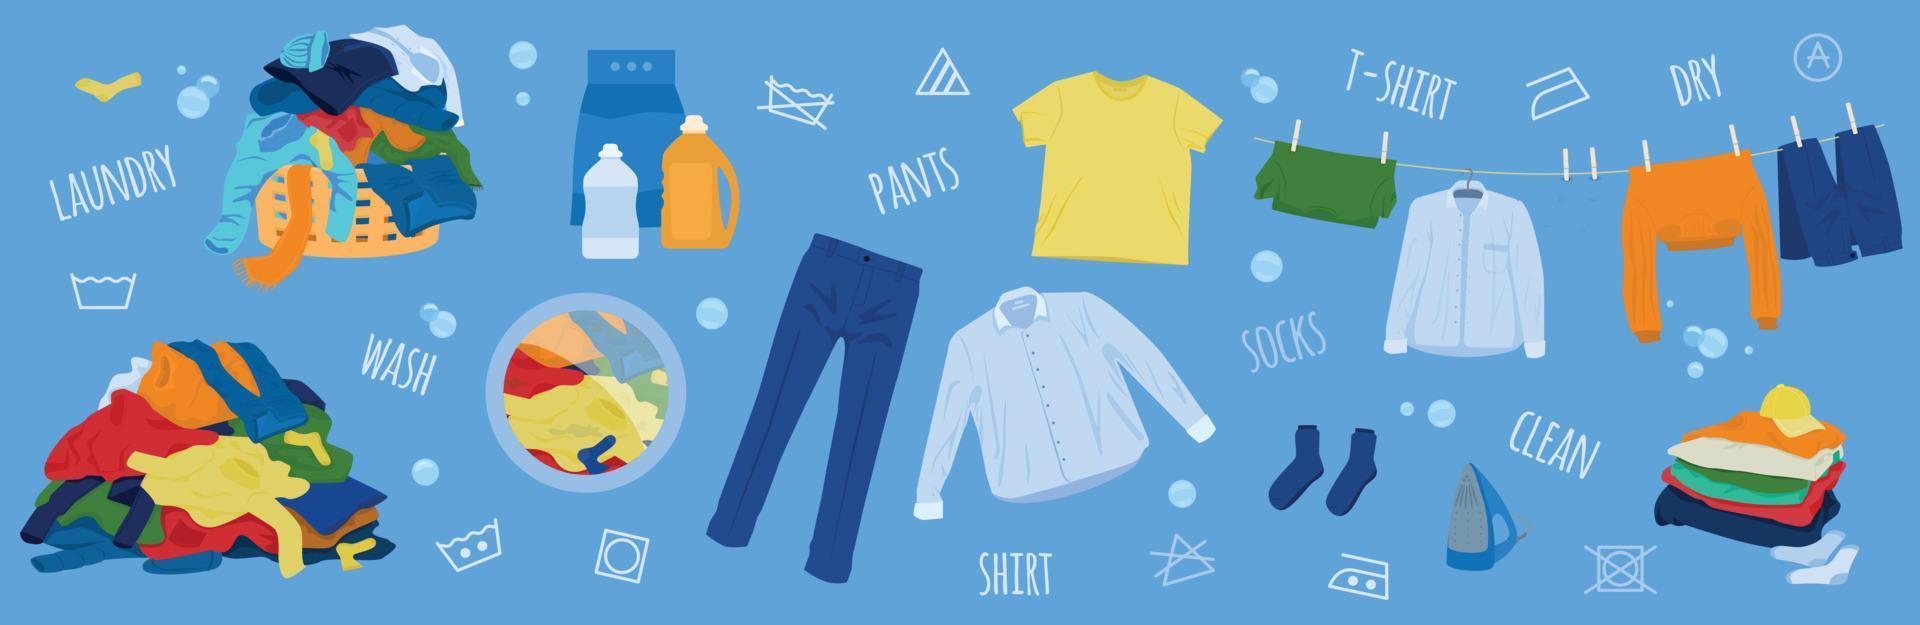 Horizontal Laundry Clothes Composition vector